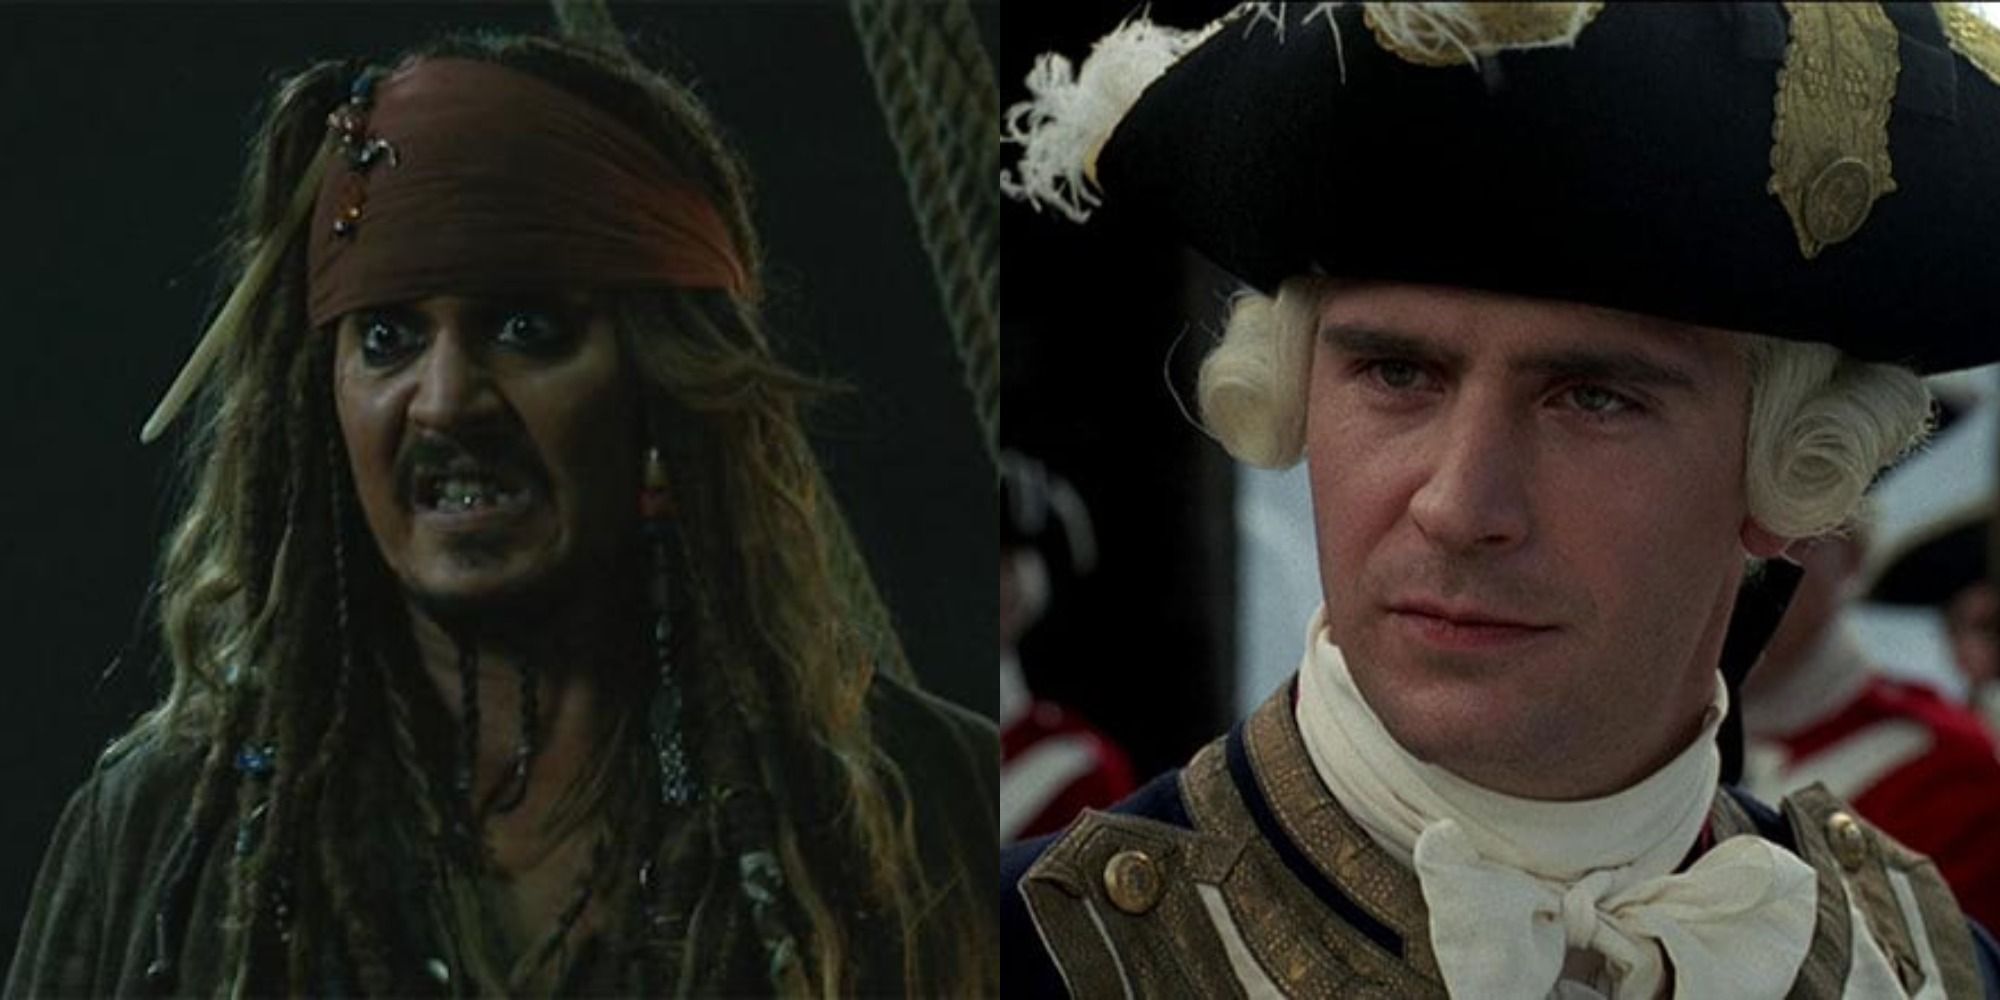 A split image showing Jack Sparrow on the left and James Norrington on the right from Pirates of the Caribbean